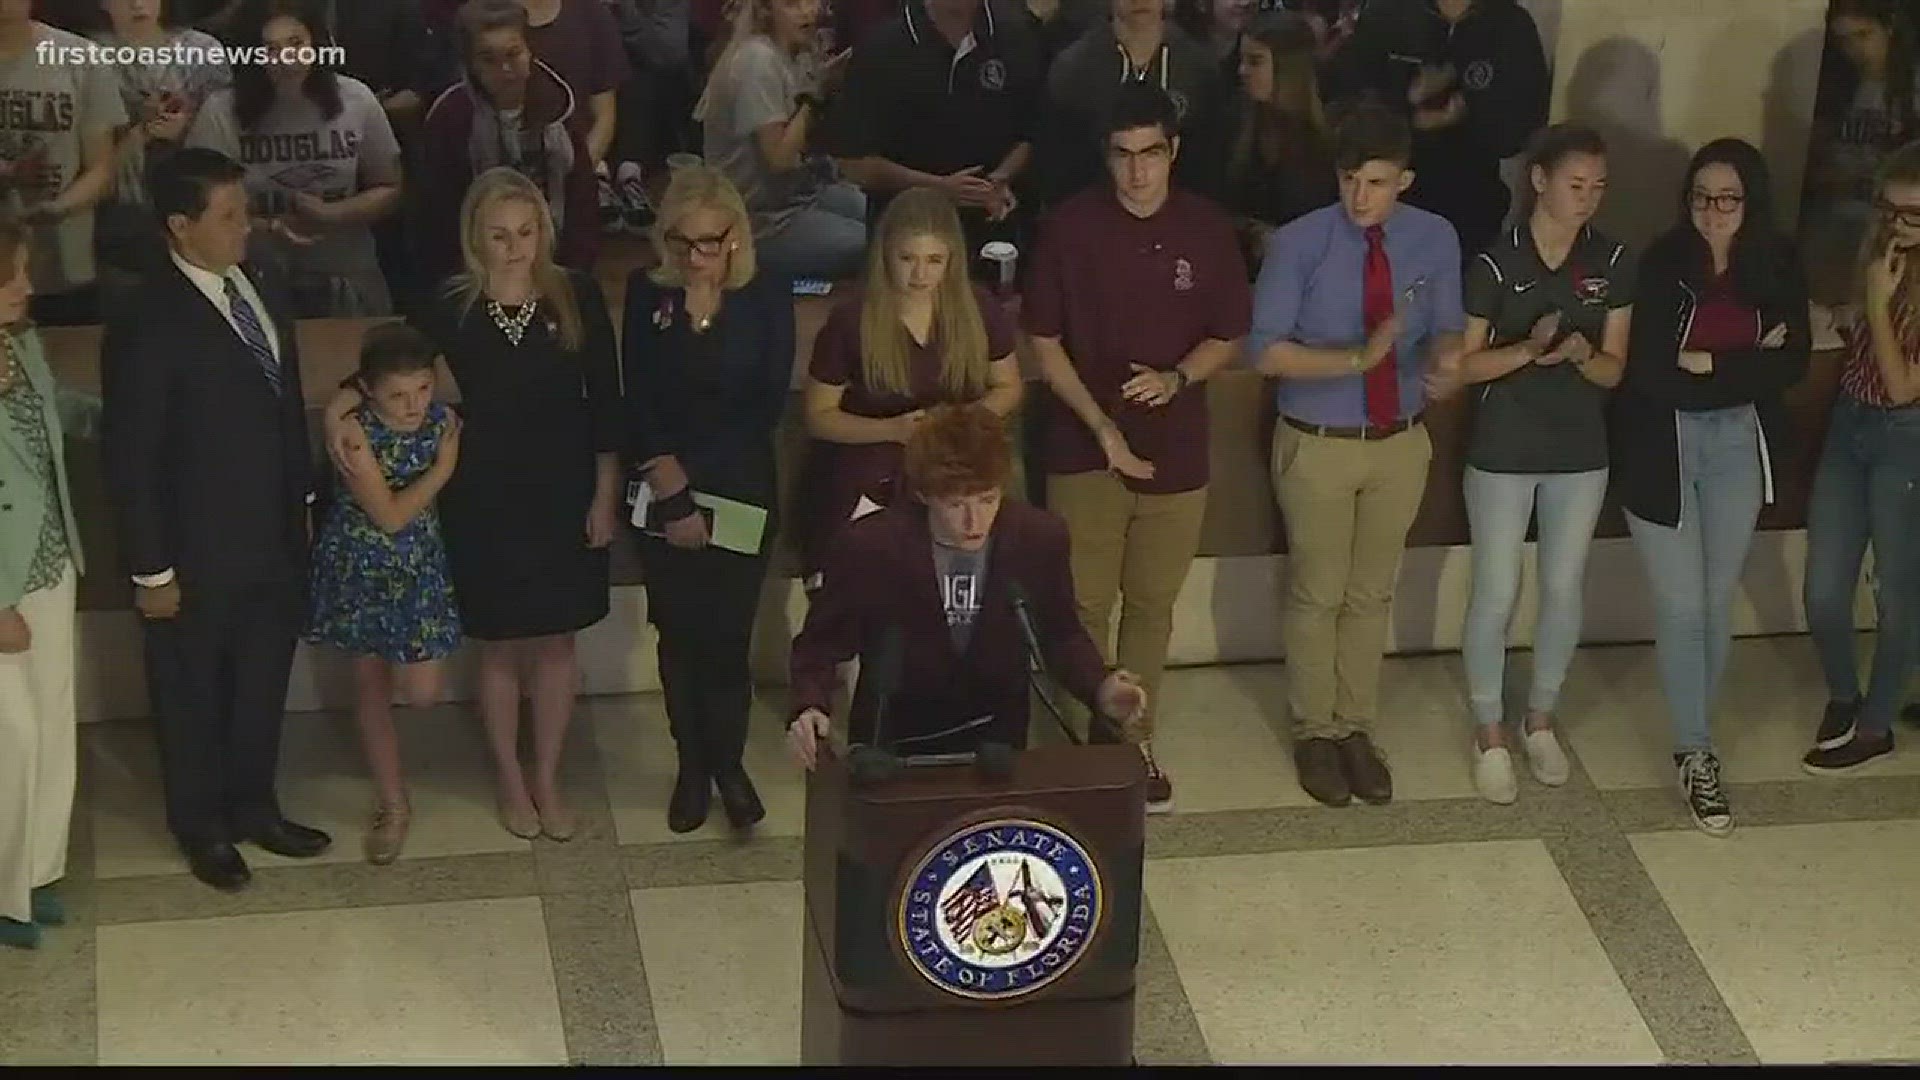 Students from Parkland made their way to Tallahassee to speak with state officials.